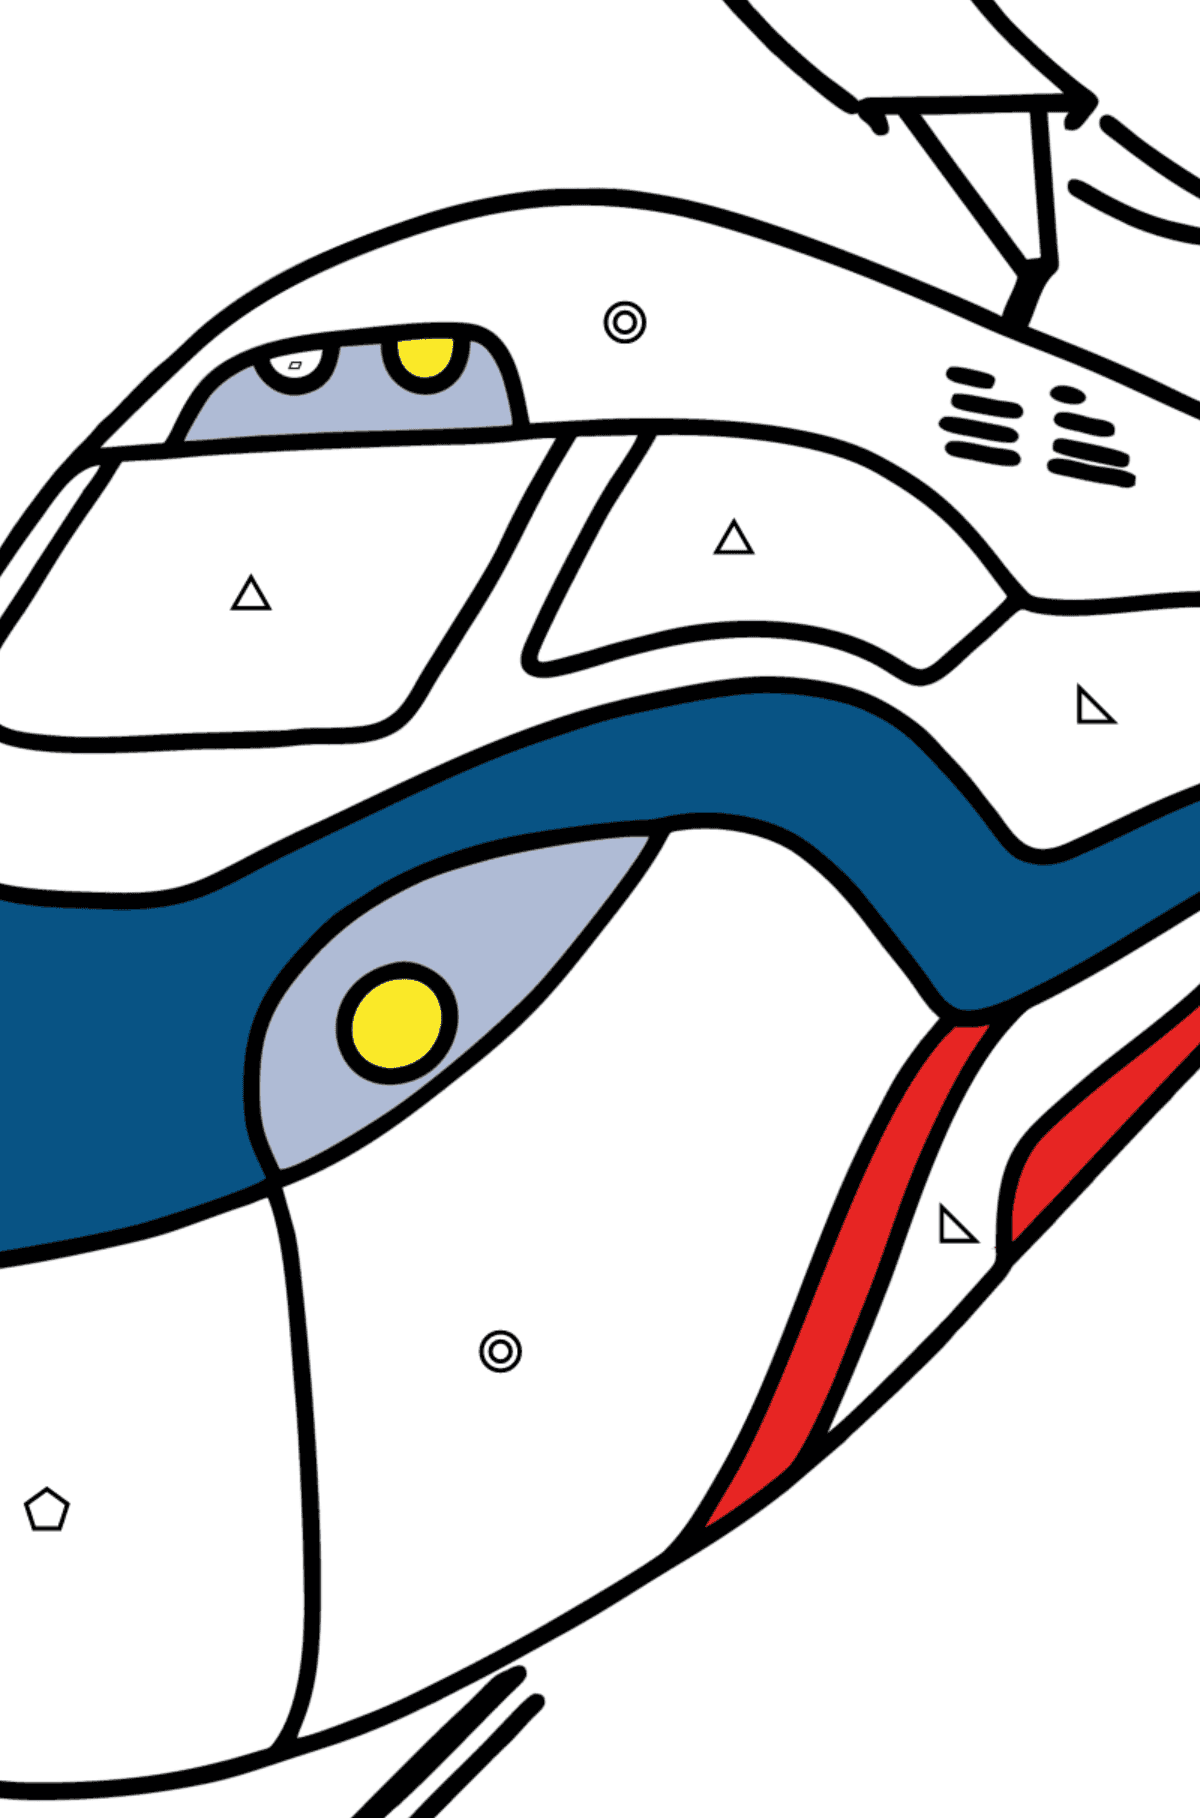 Train coloring page online - Coloring by Geometric Shapes for Kids